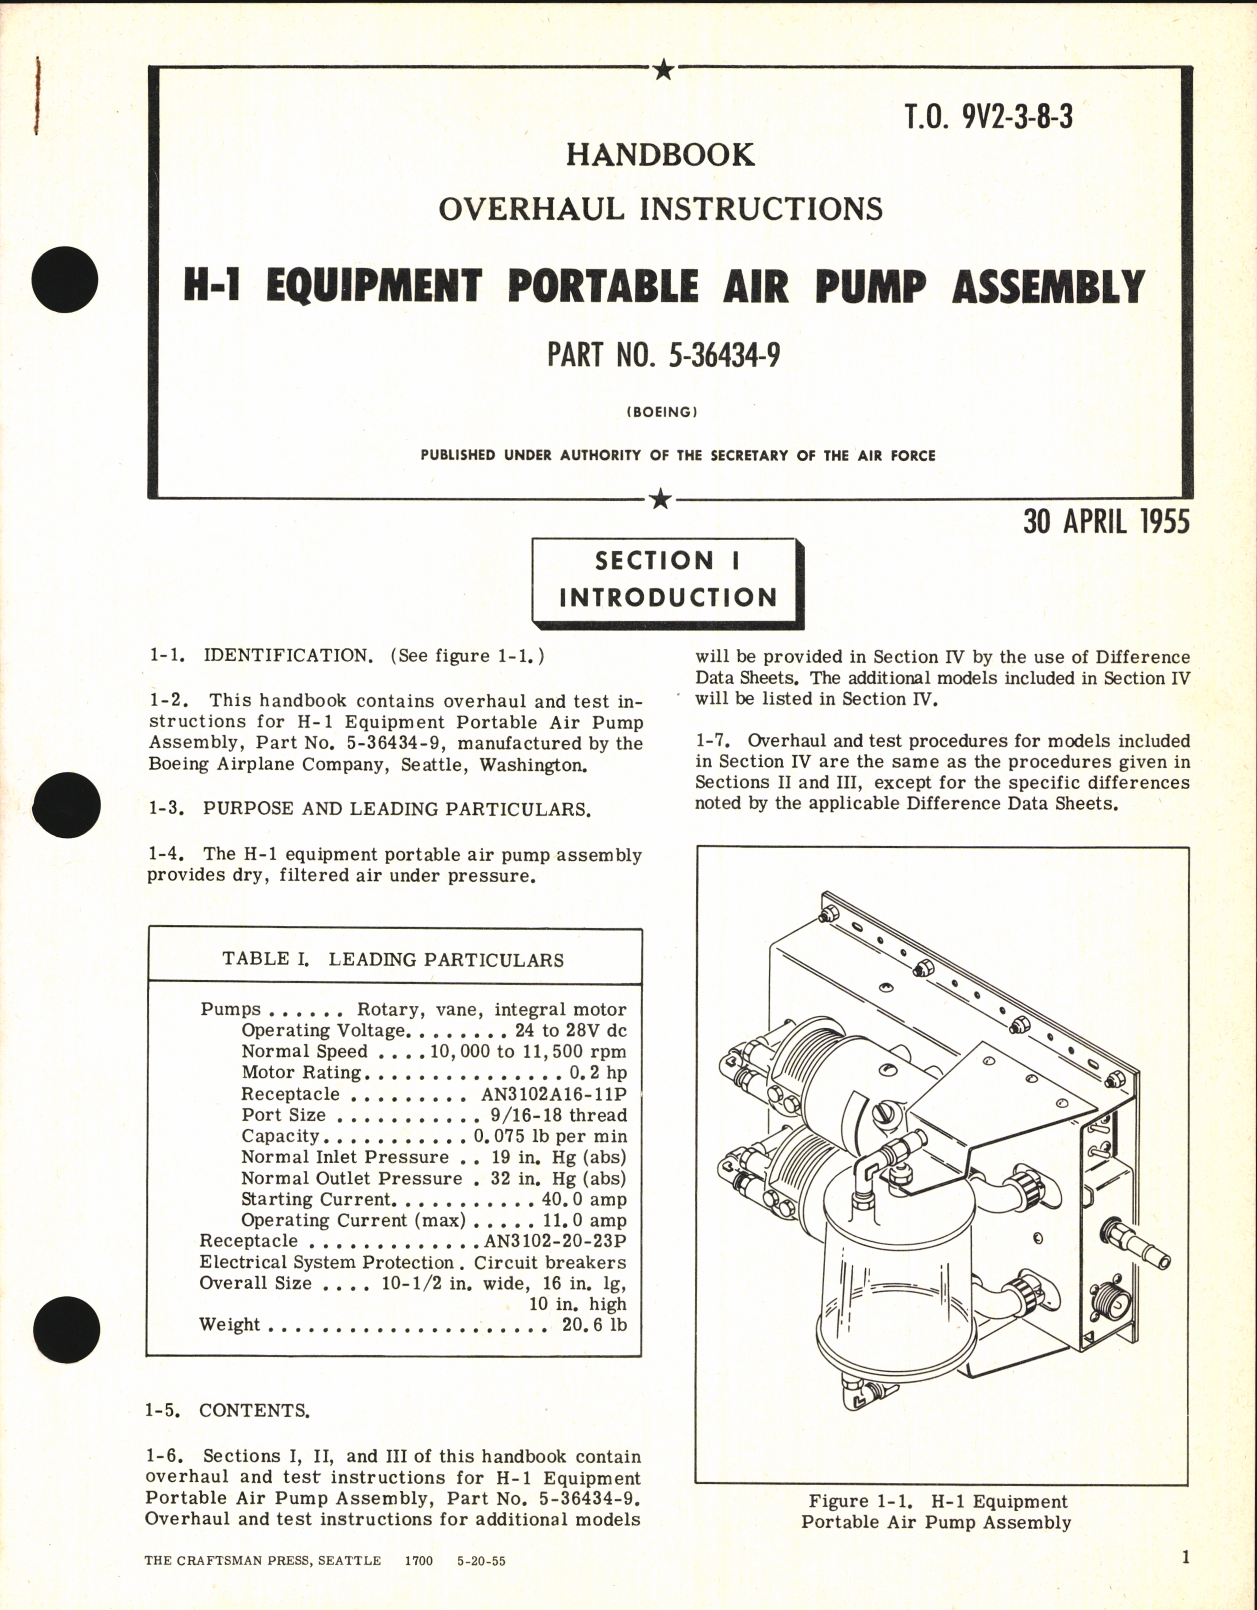 Sample page 1 from AirCorps Library document: Handbook of Overhaul Instructions for H-1 Equipment Portable Air Pump Assembly Part No. 5-36434-9